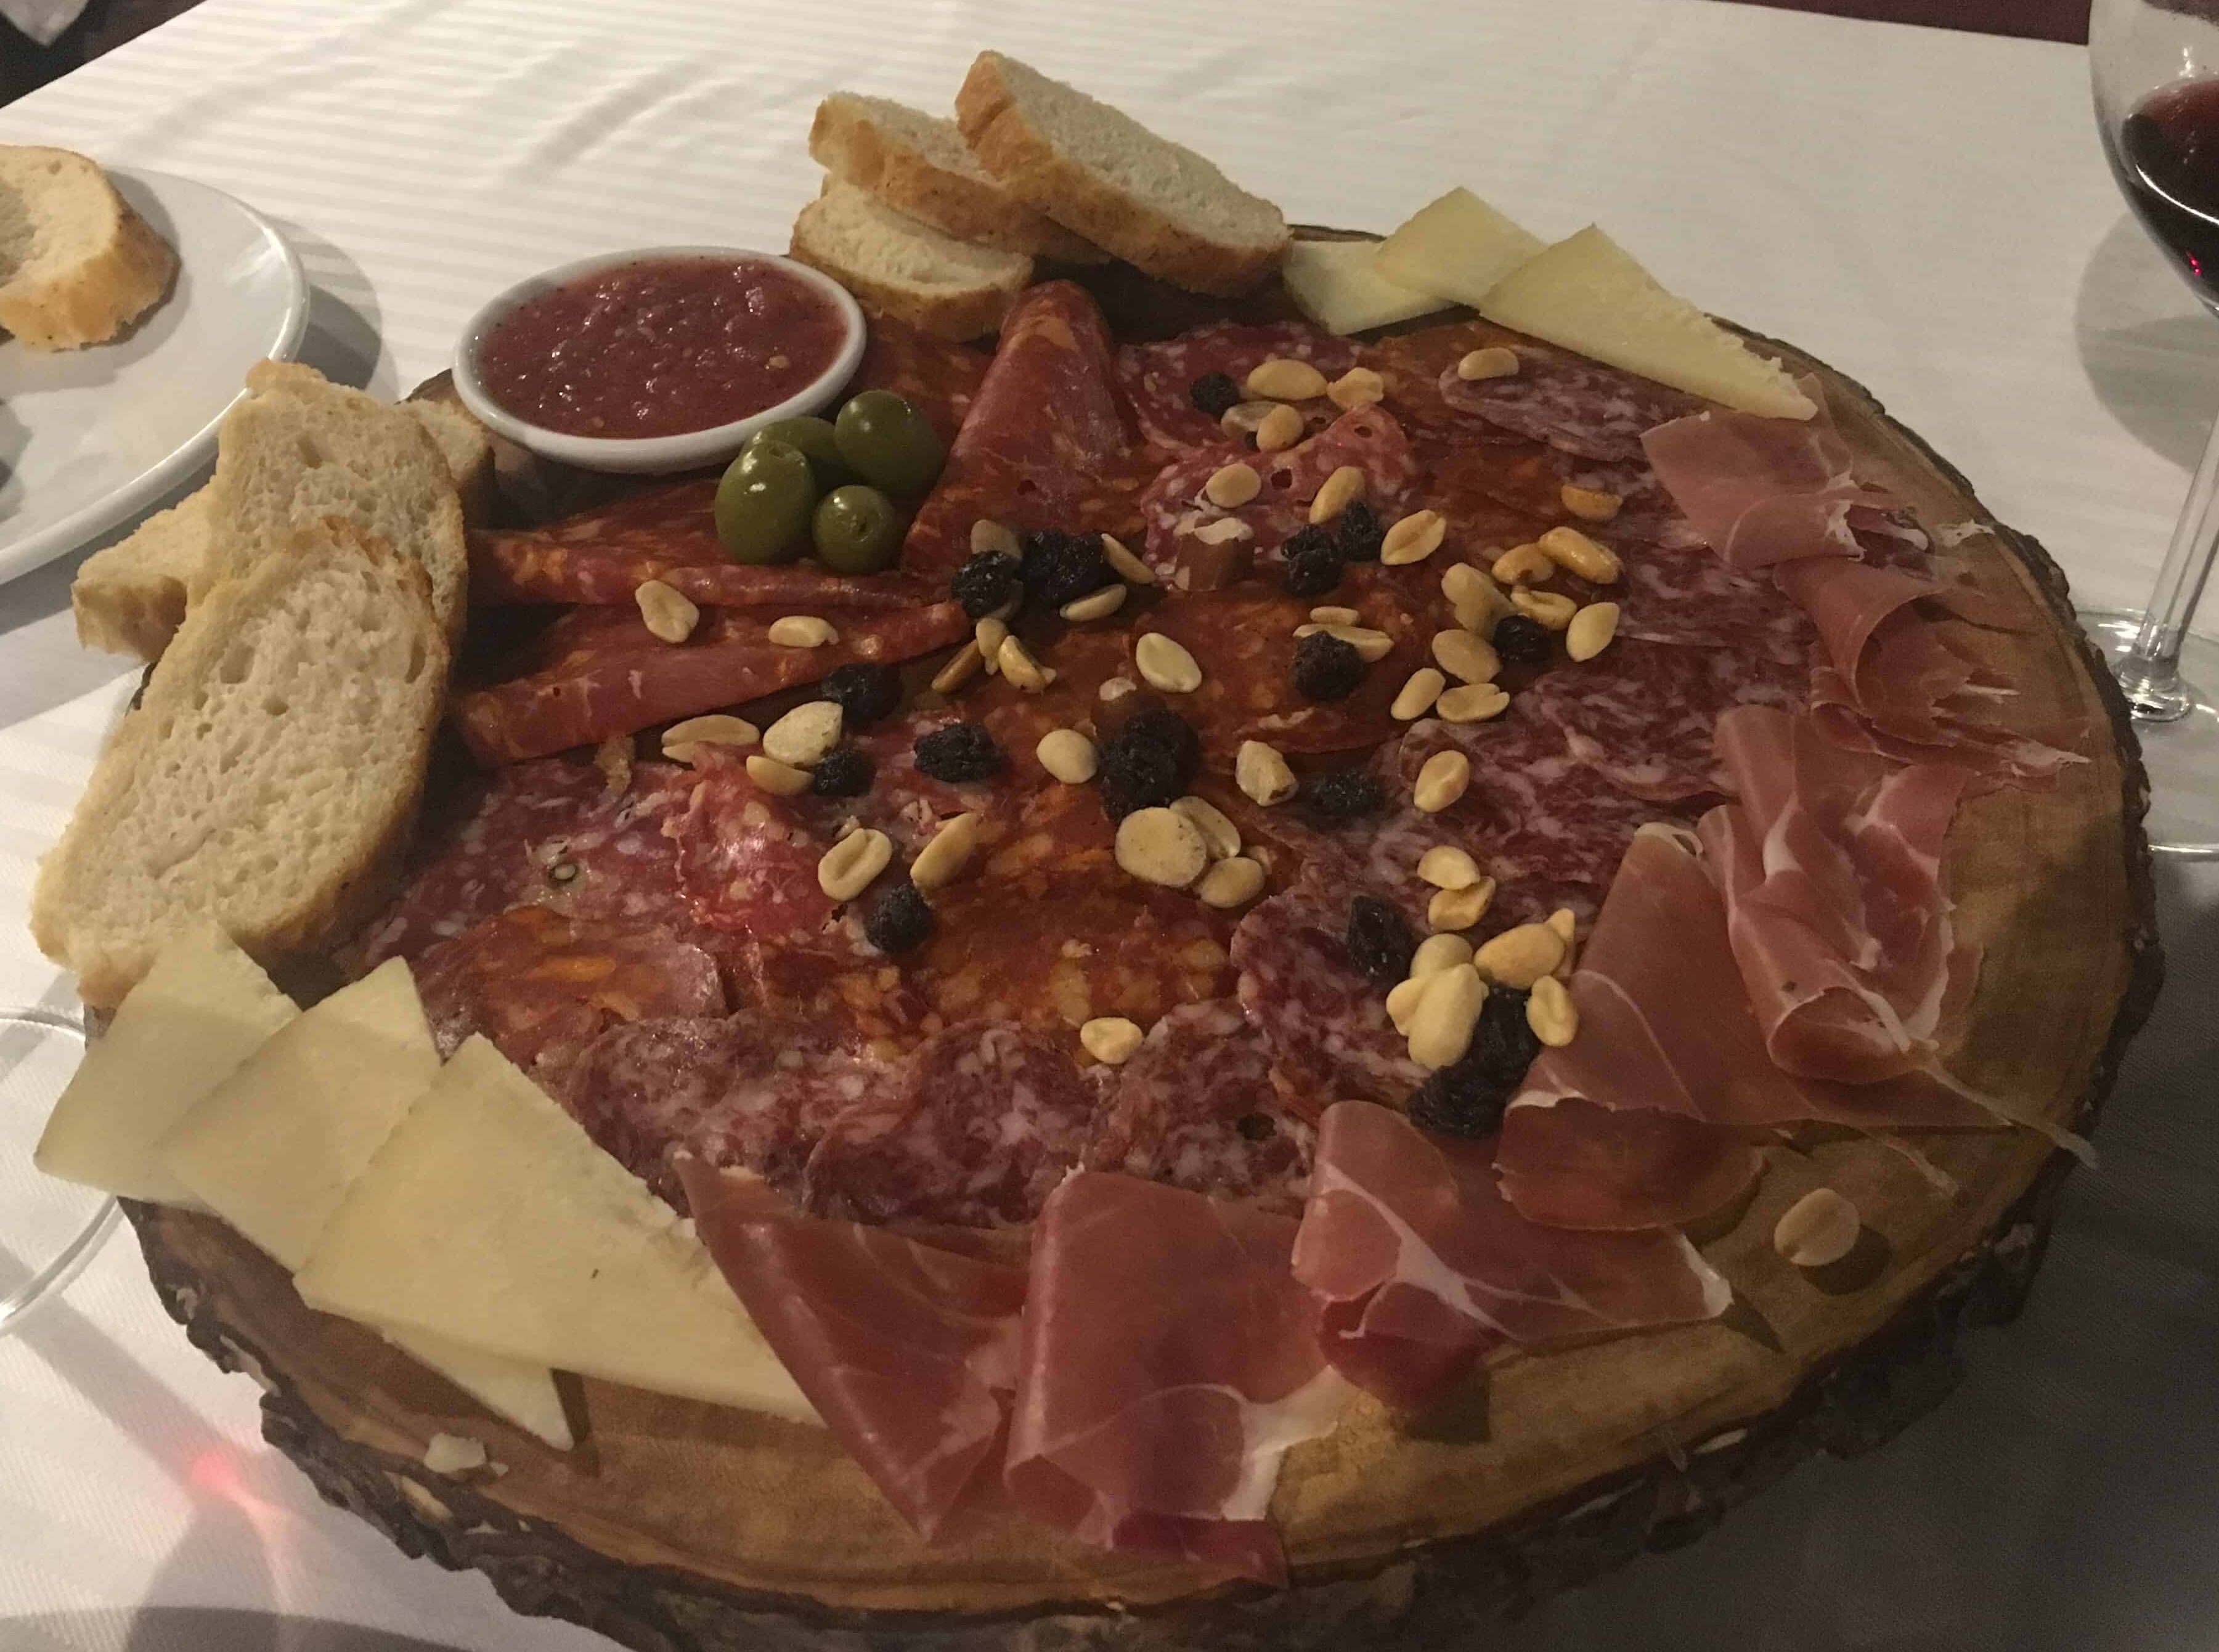 Spanish meats and cheese at Vuestro